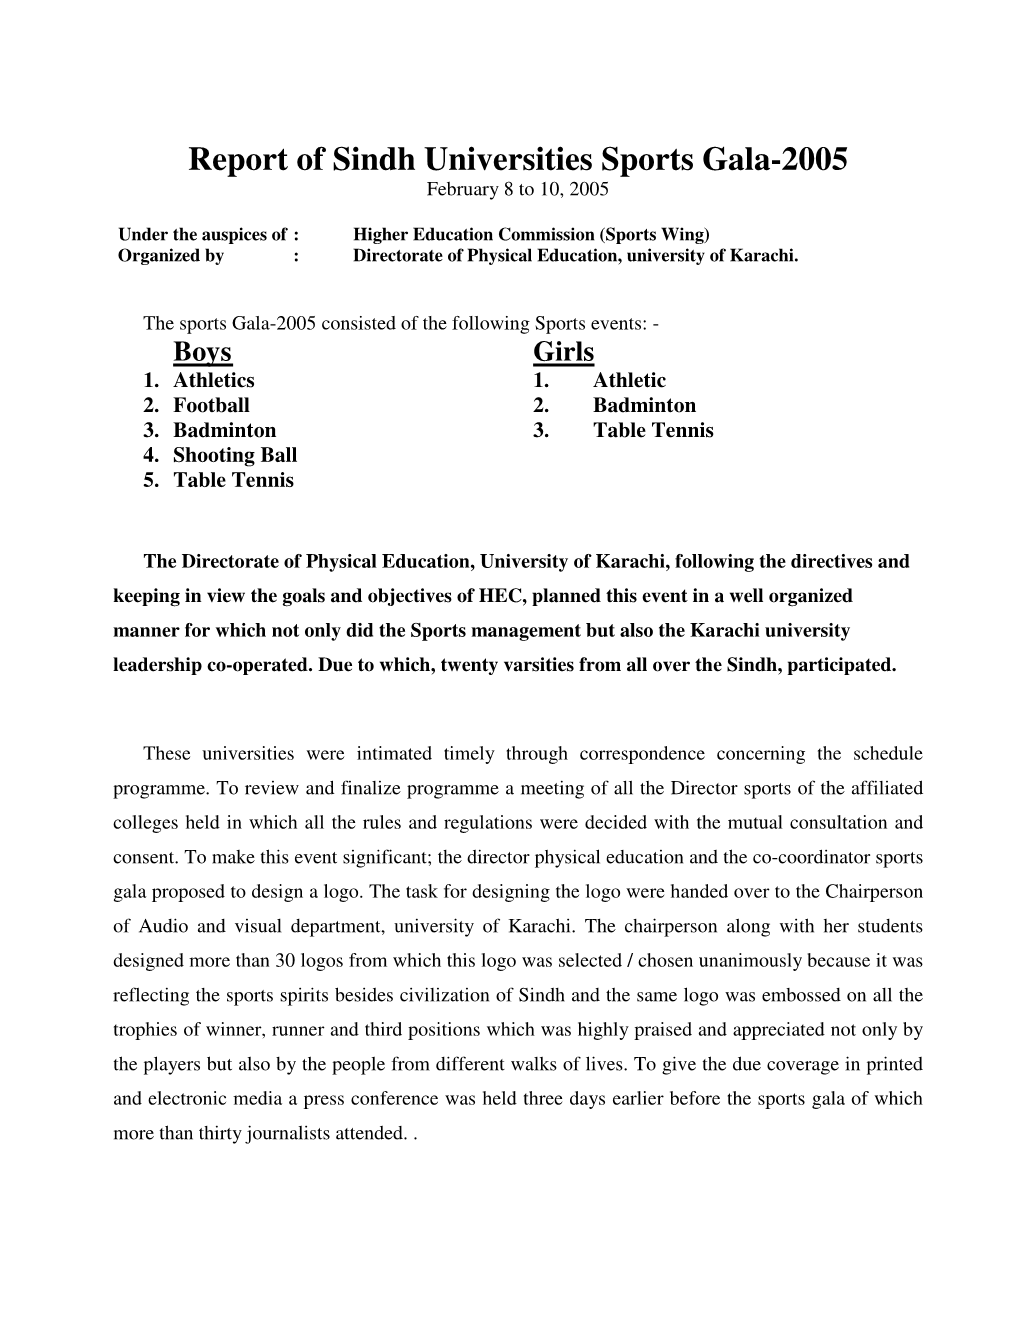 Report of Sindh Universities Sports Gala-2005 February 8 to 10, 2005